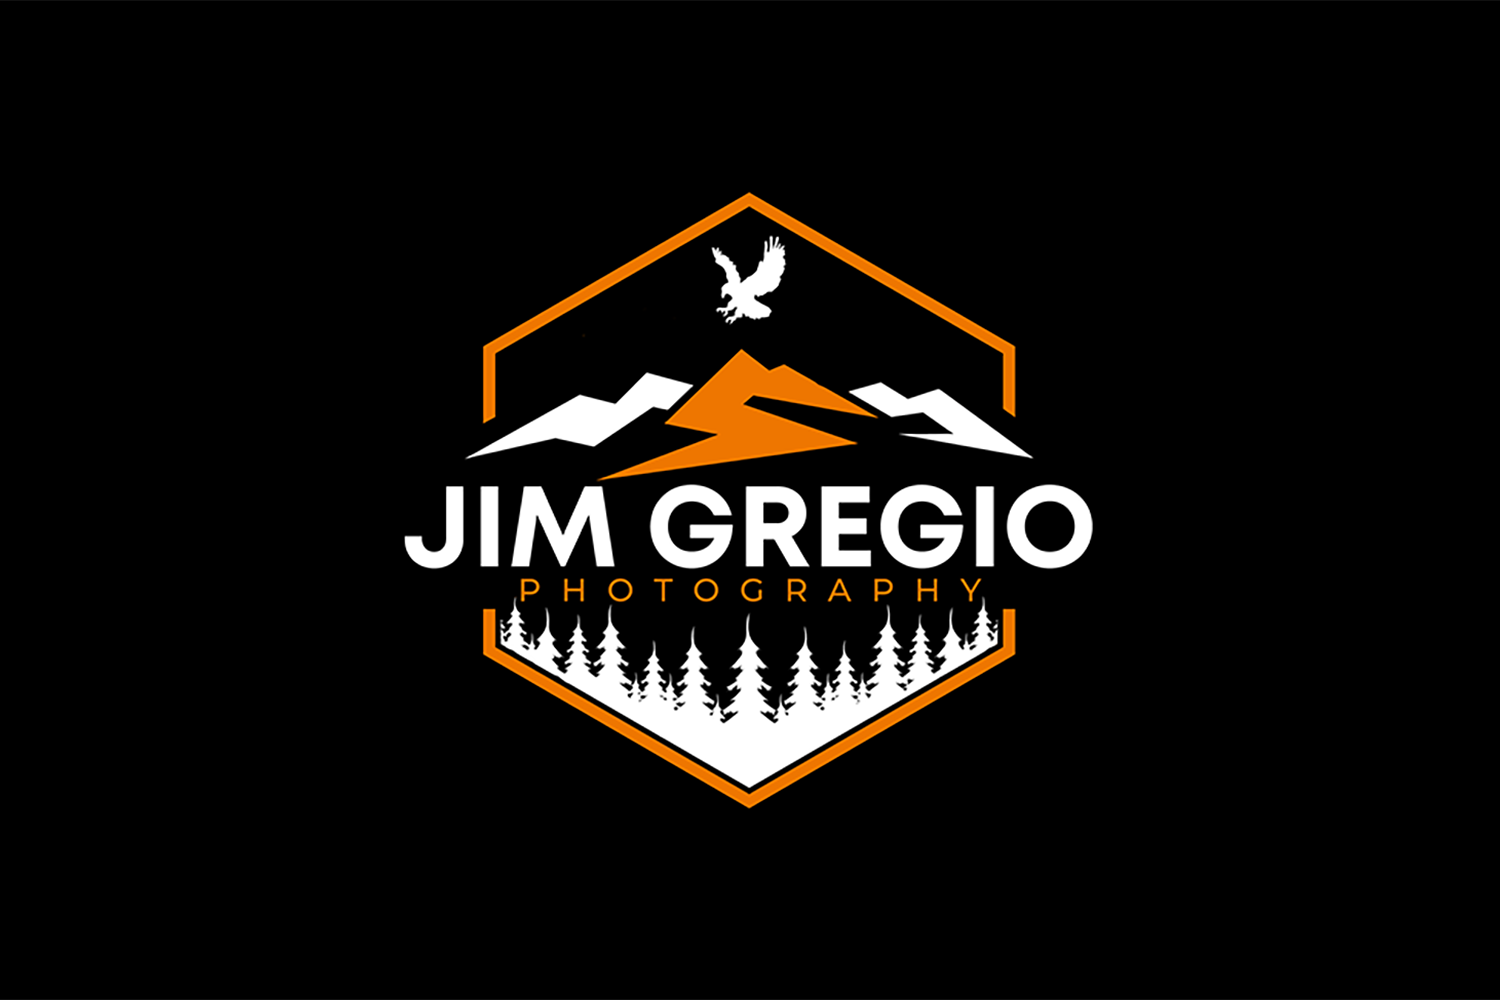 The official logo of Jim Gregio Photography in Beaver County, Pennsylvania